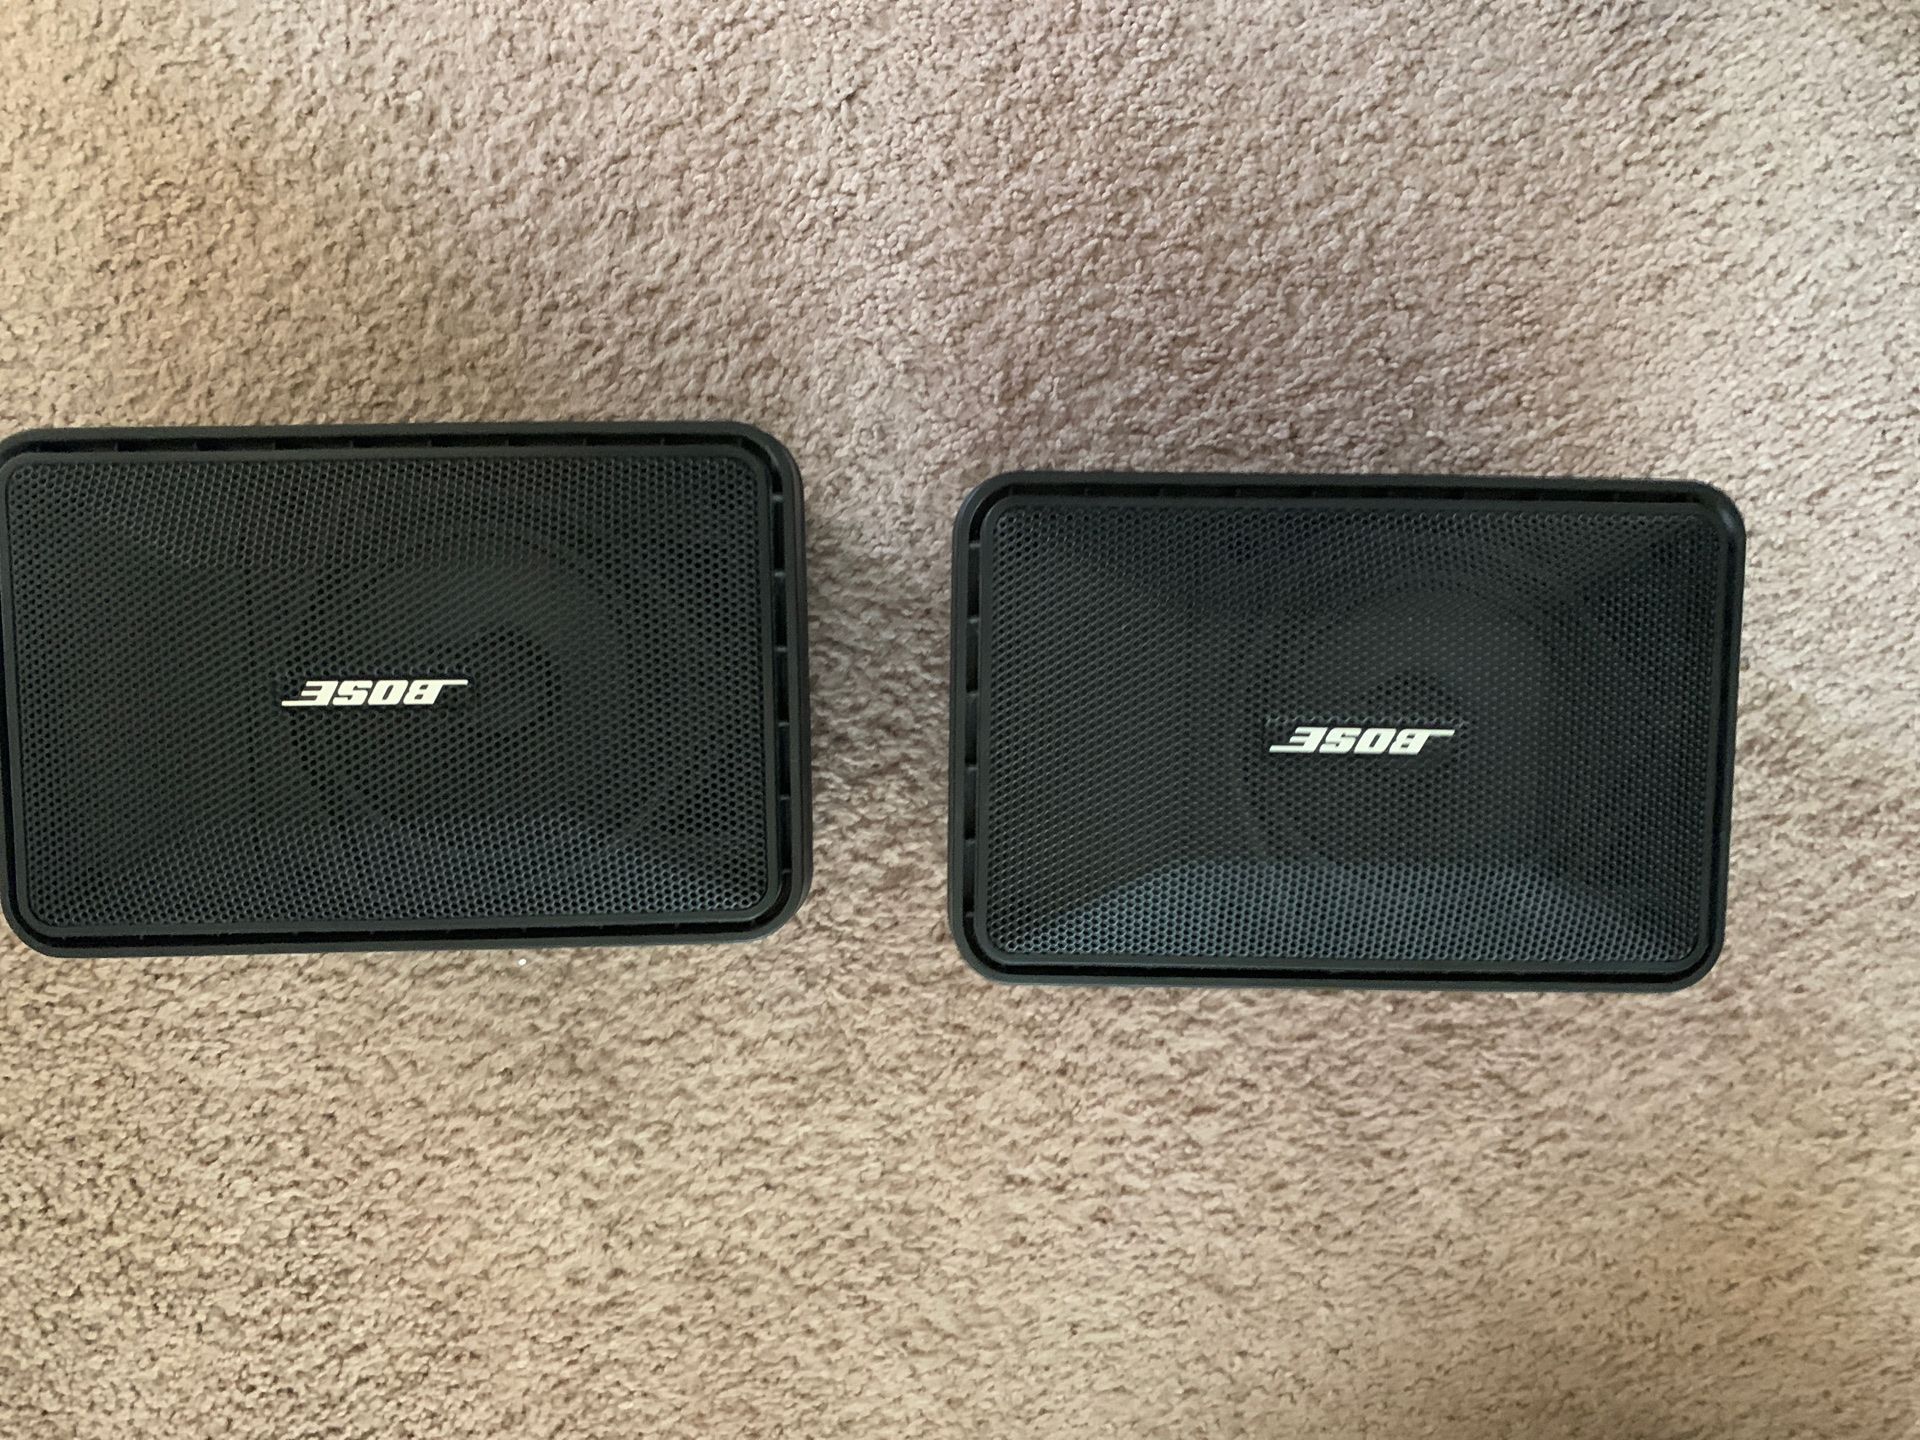 Bose Speakers it says 10 to 60 W I used them as my rear surround sound speakers